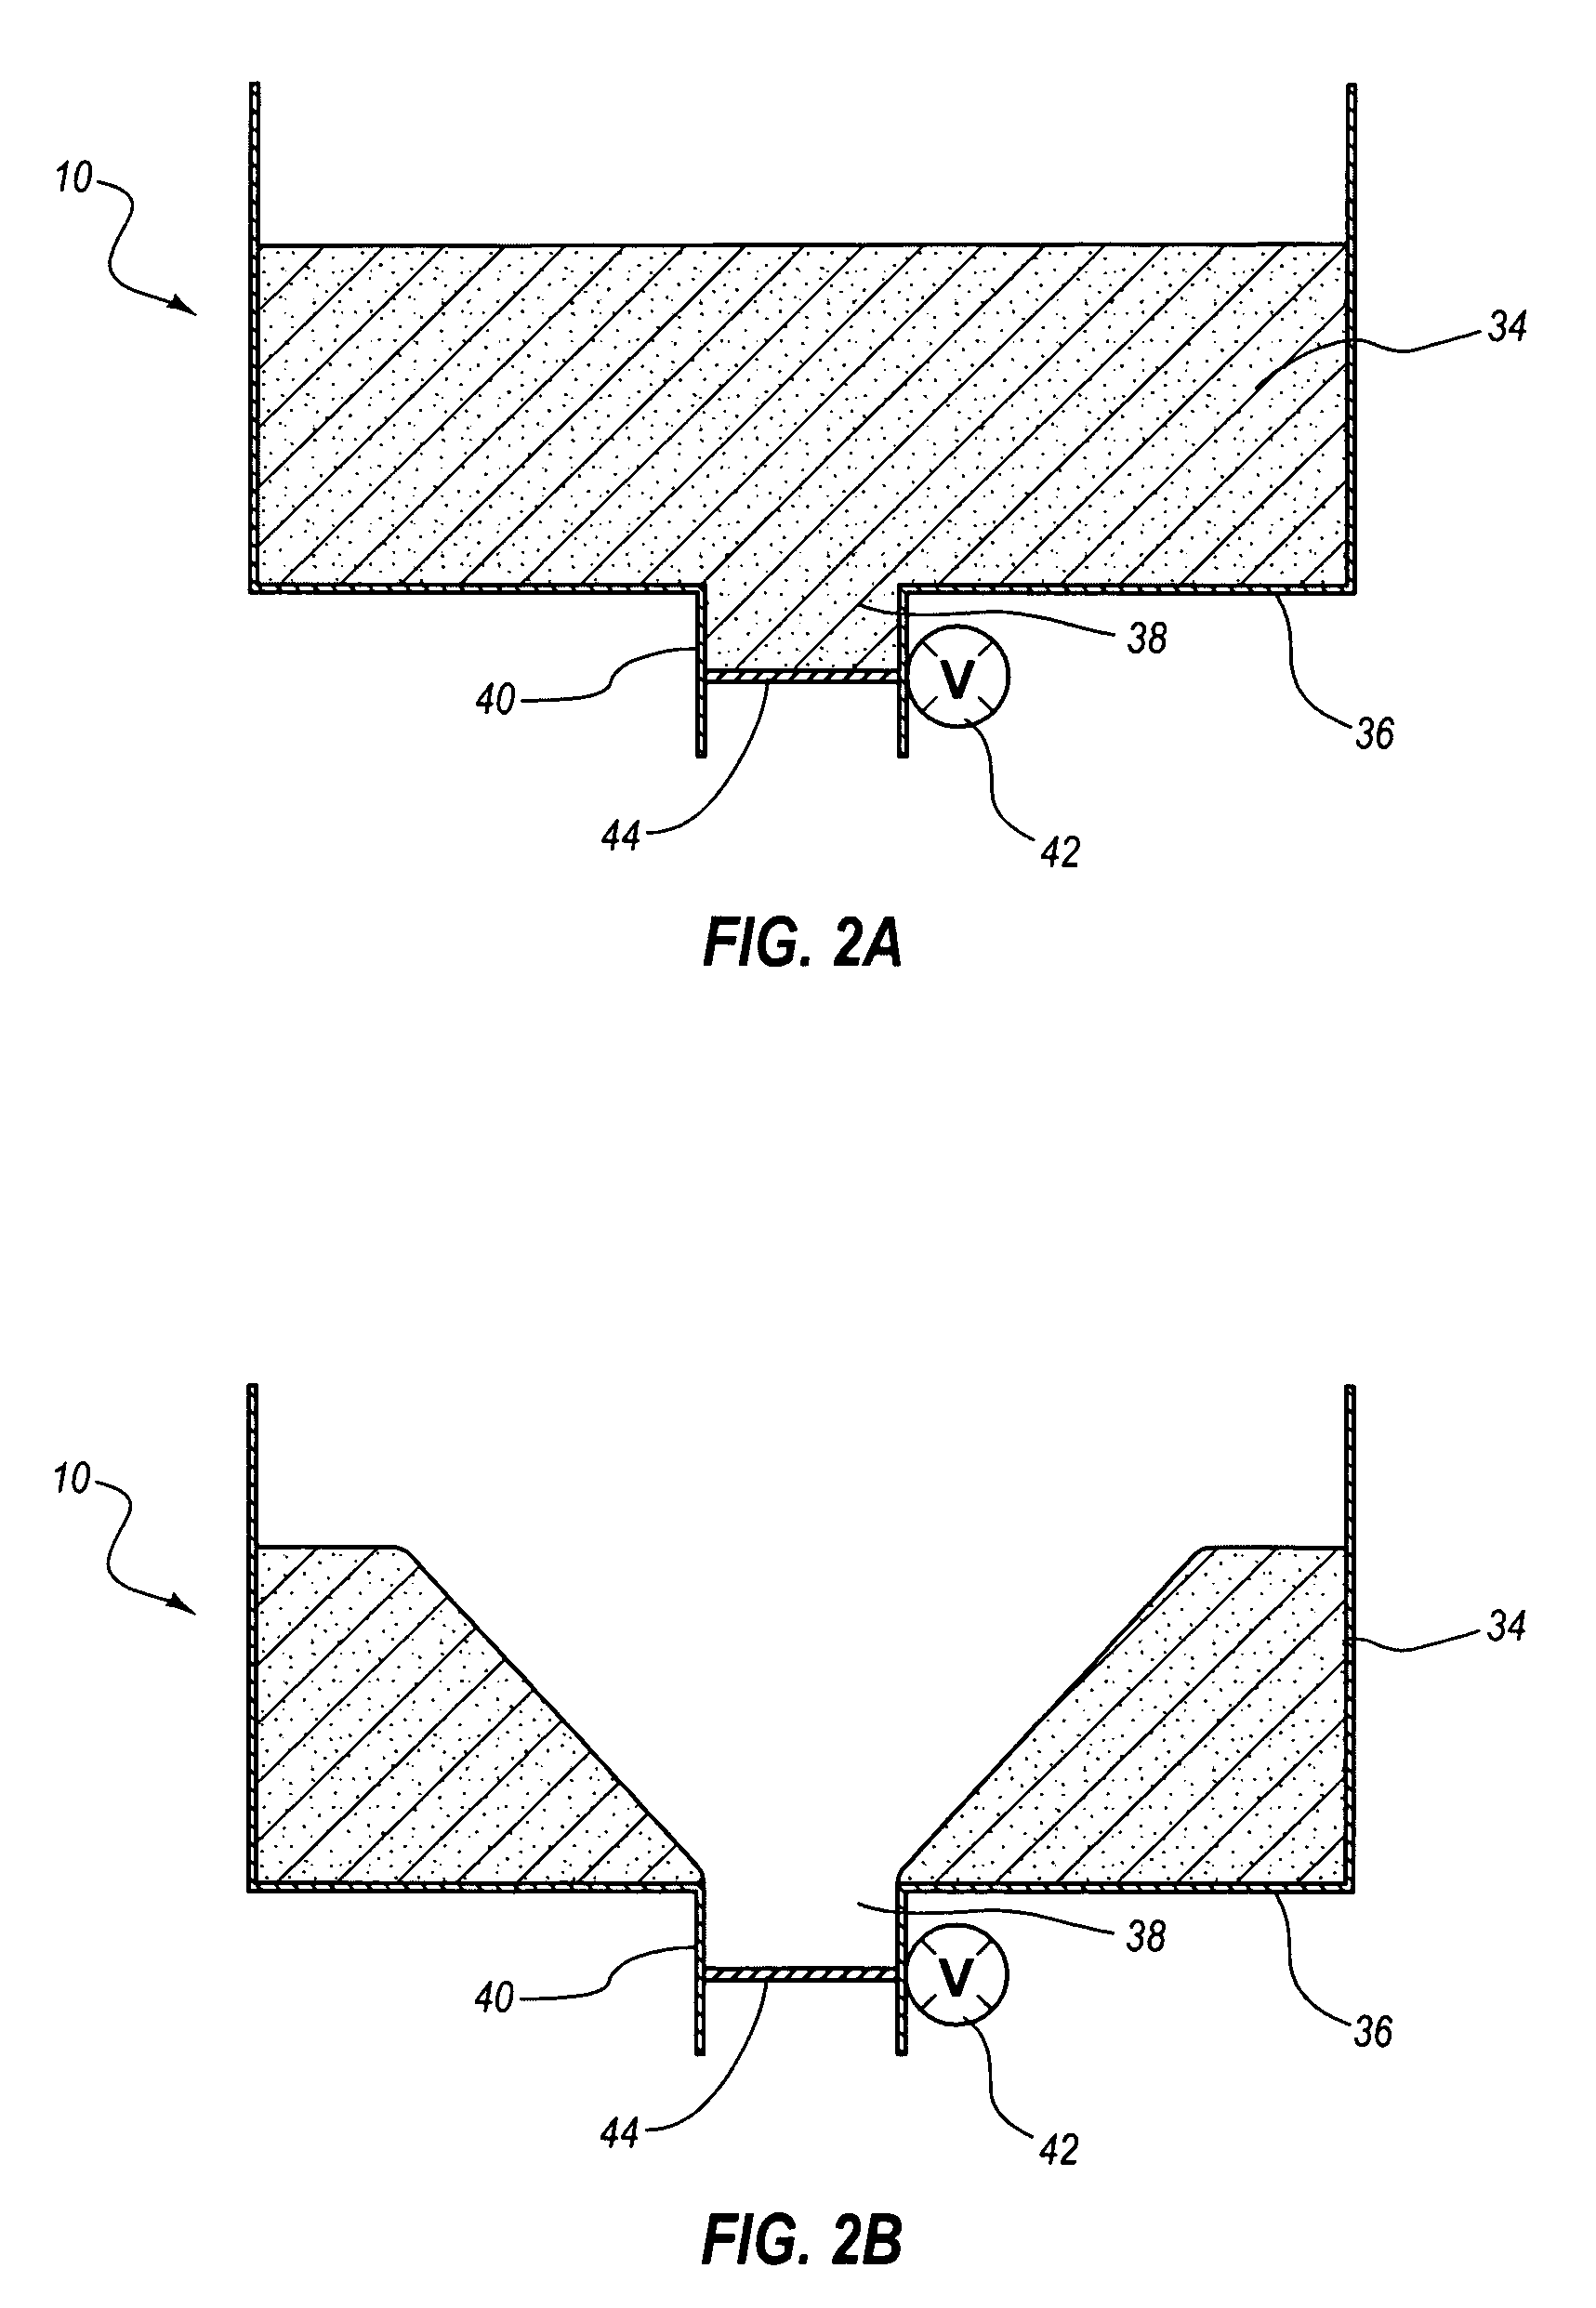 Methods for removal of non-digestible matter from an upflow anaerobic digester